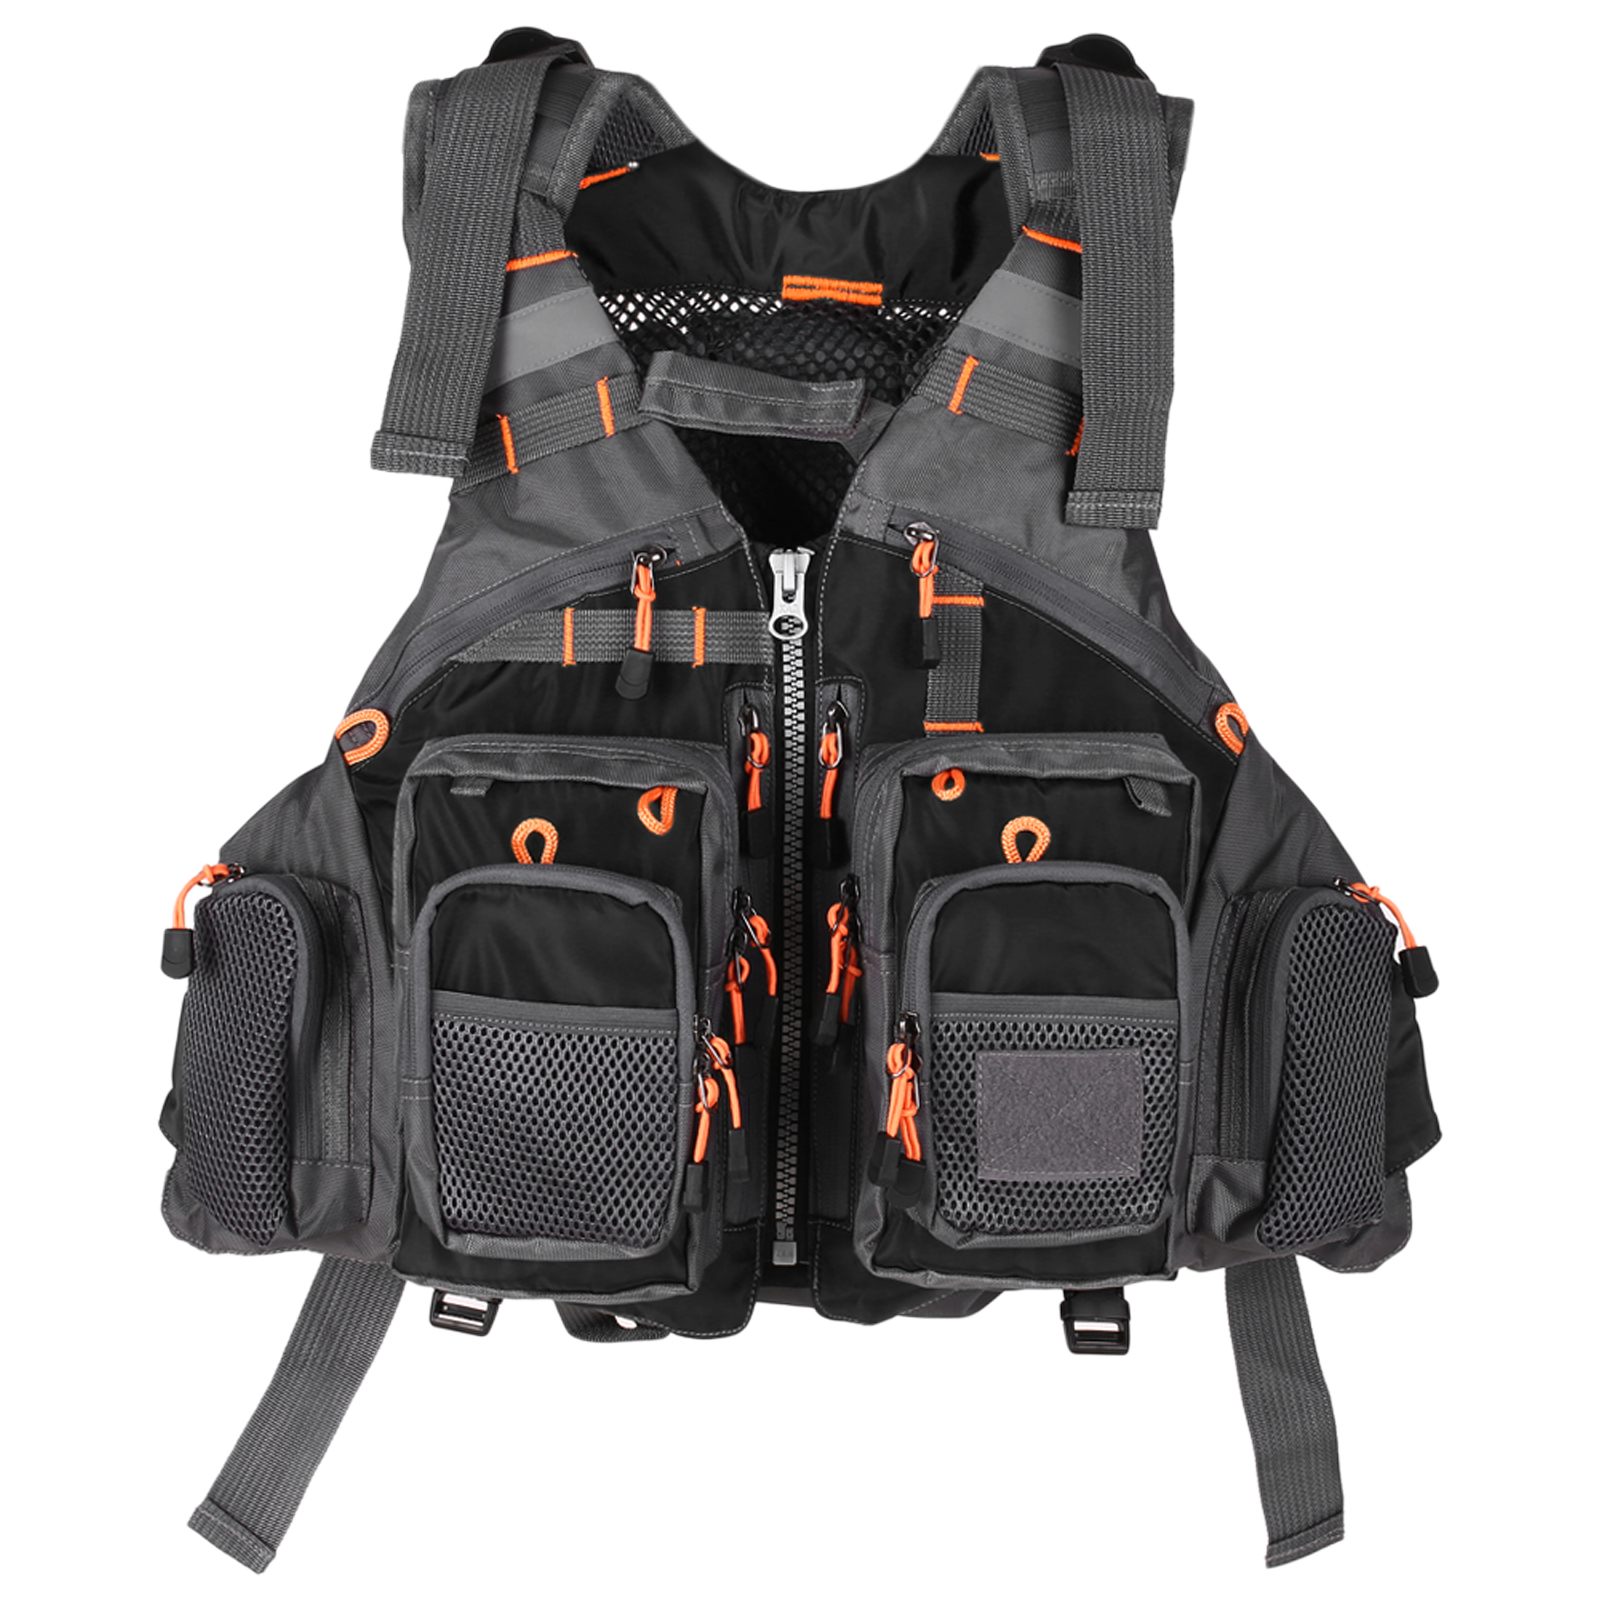 Lixada Fly Fishing Vest with Breathable Mesh for Outdoor Fishing Activities - image 1 of 7